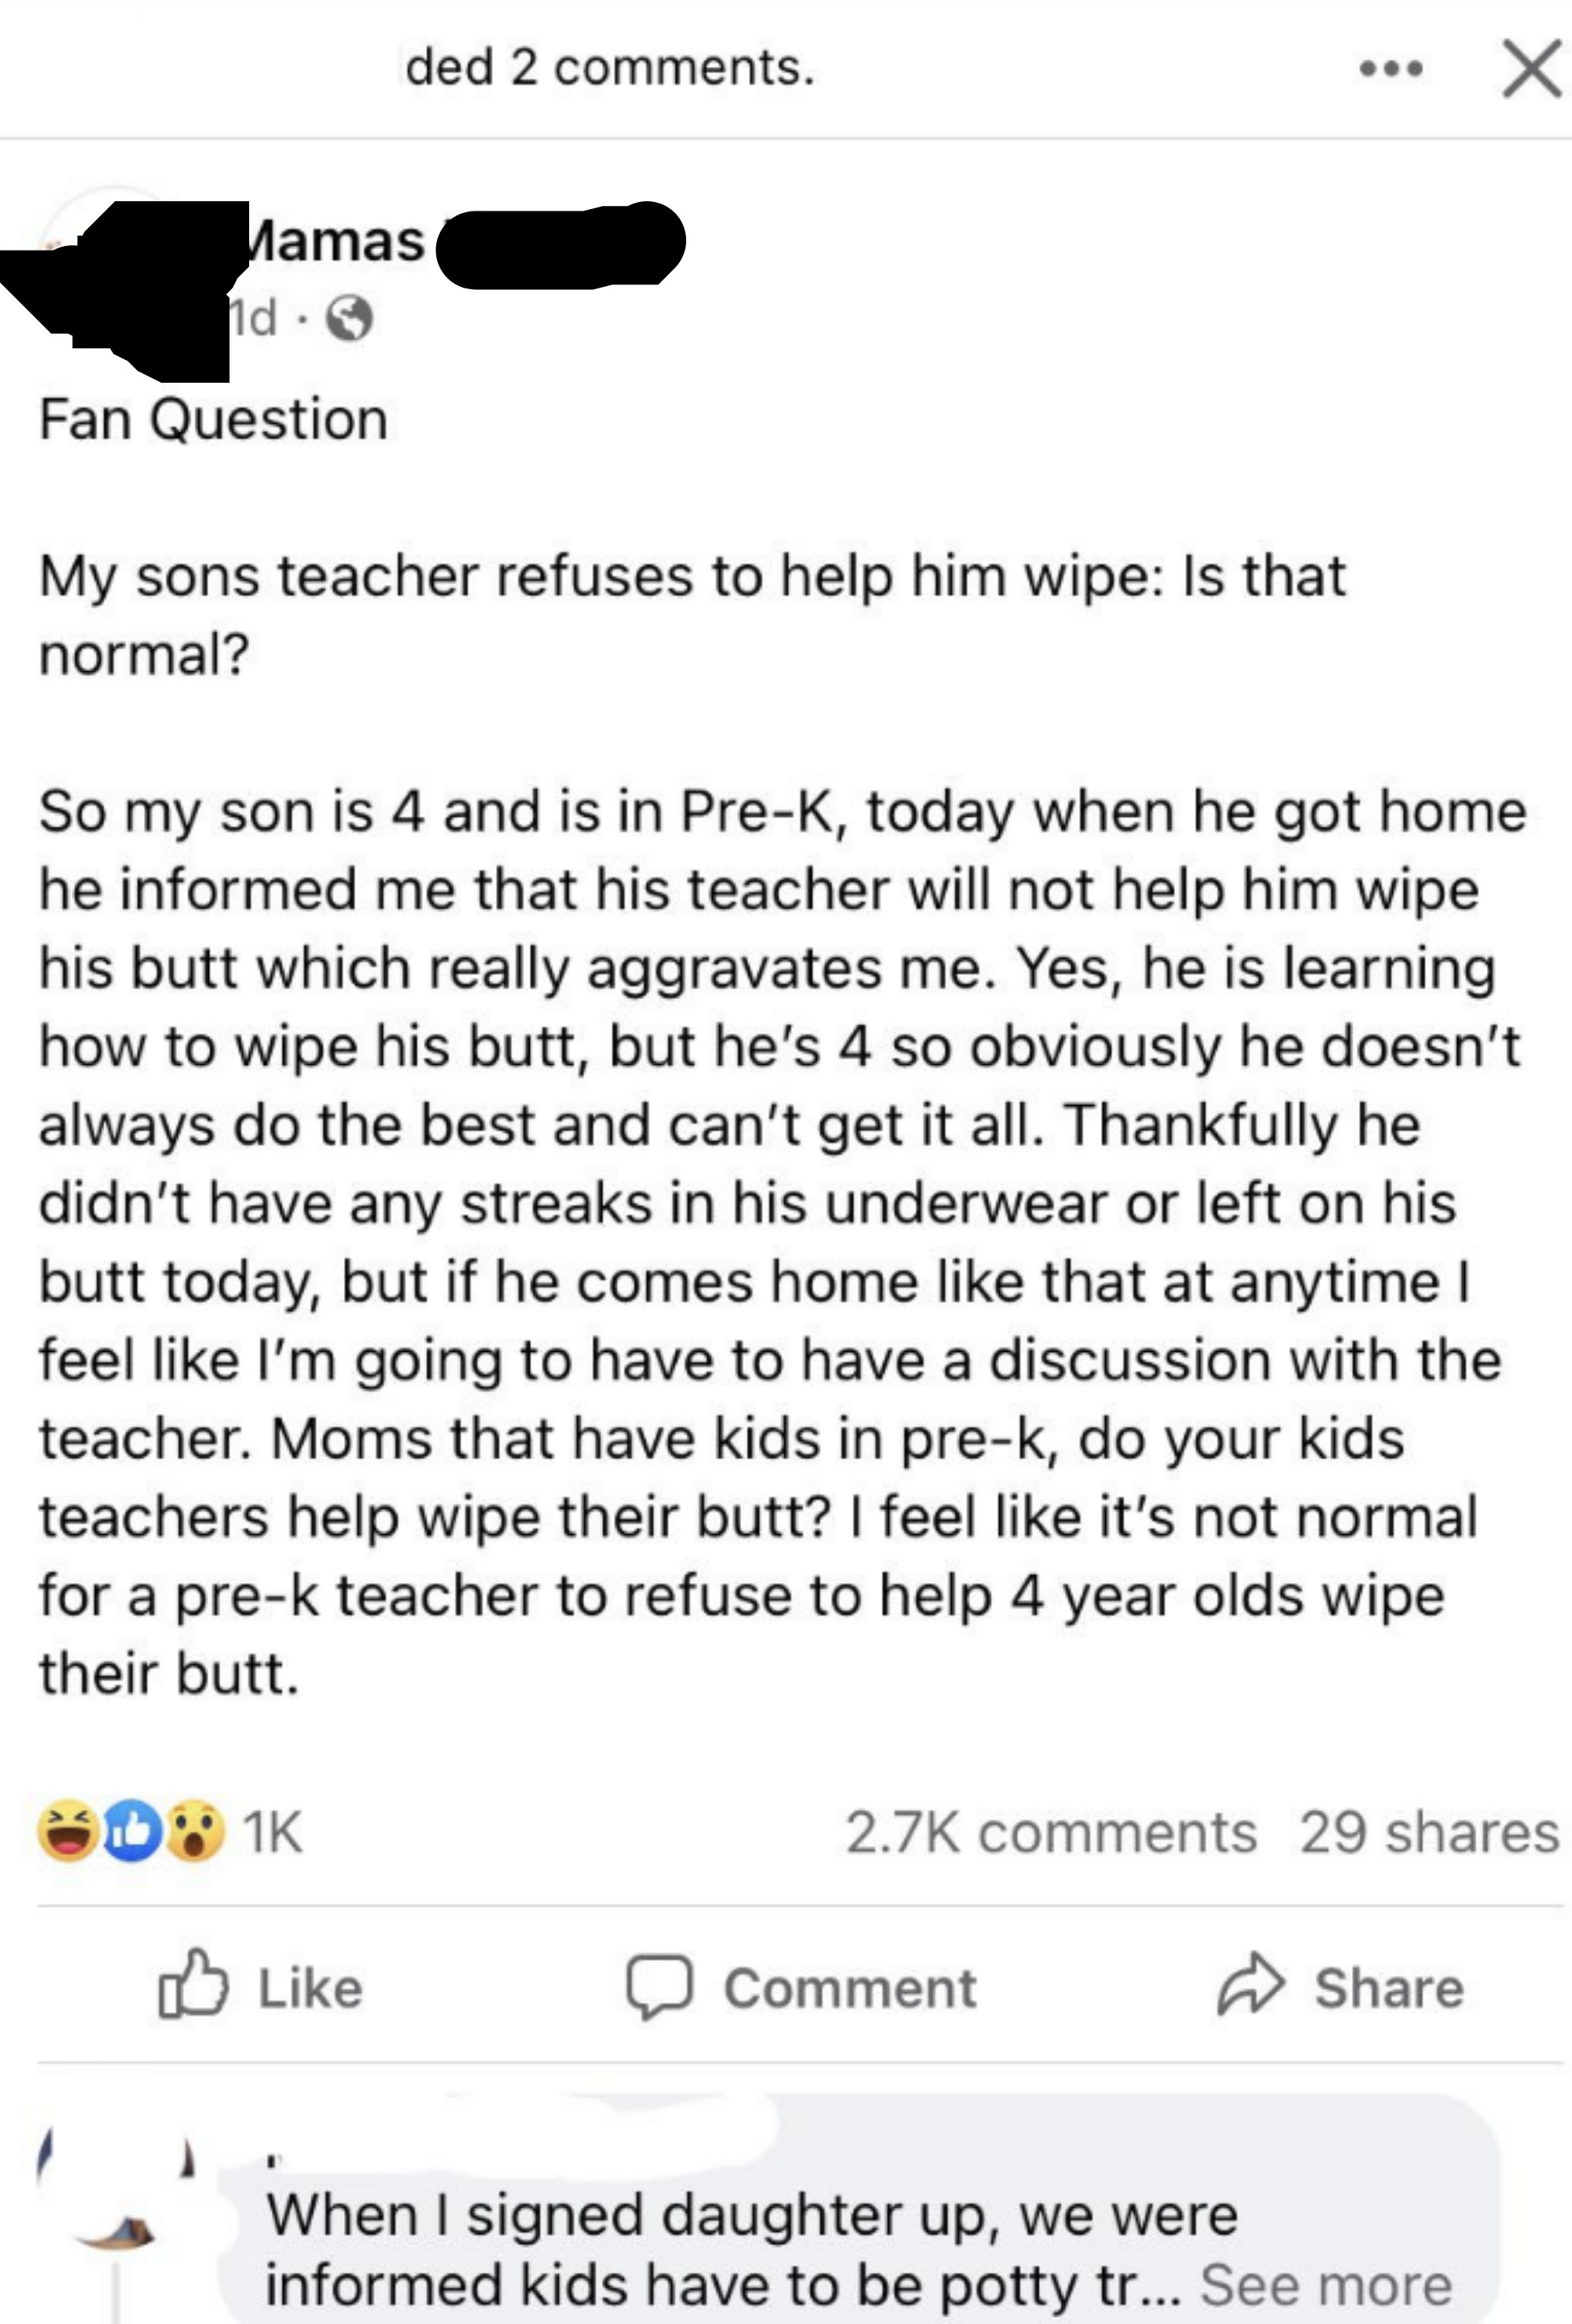 mom asking if it&#x27;s normal that a teacher doesn&#x27;t help with wiping butts because her child is 4 and is still learning